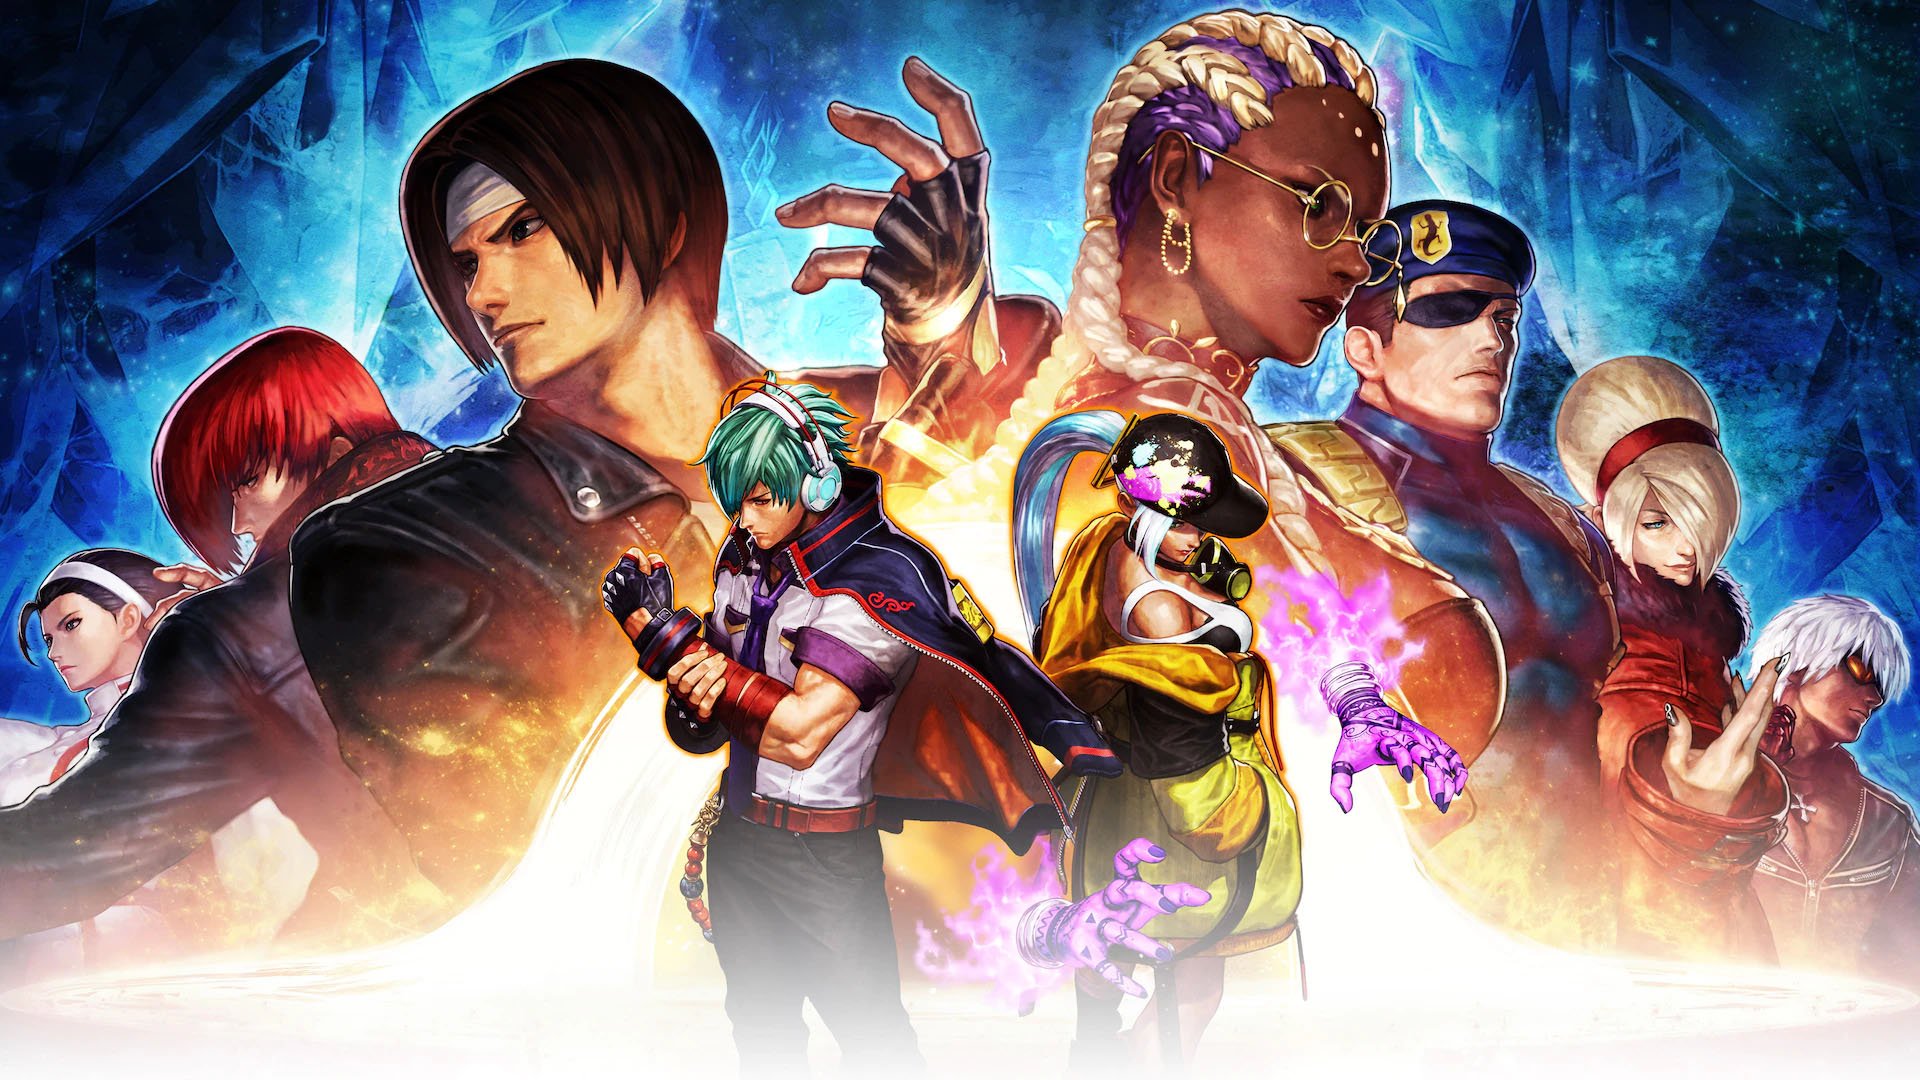 Najd in King of Fighters XV at EVO and wider Release Soon